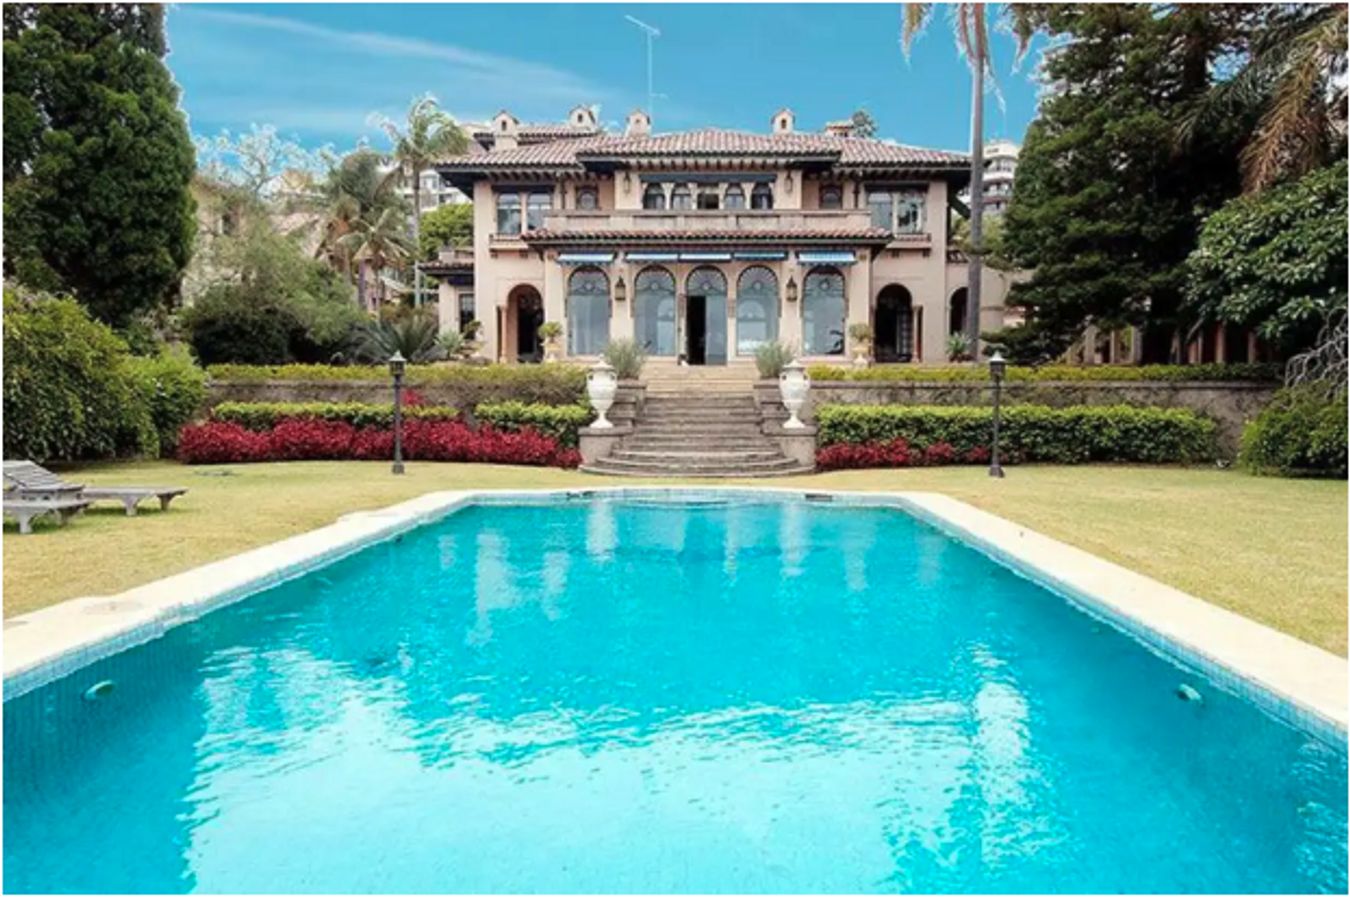 From $1m to $130m: 11 record-smashing houses (sorry, Melbourne) - AFR